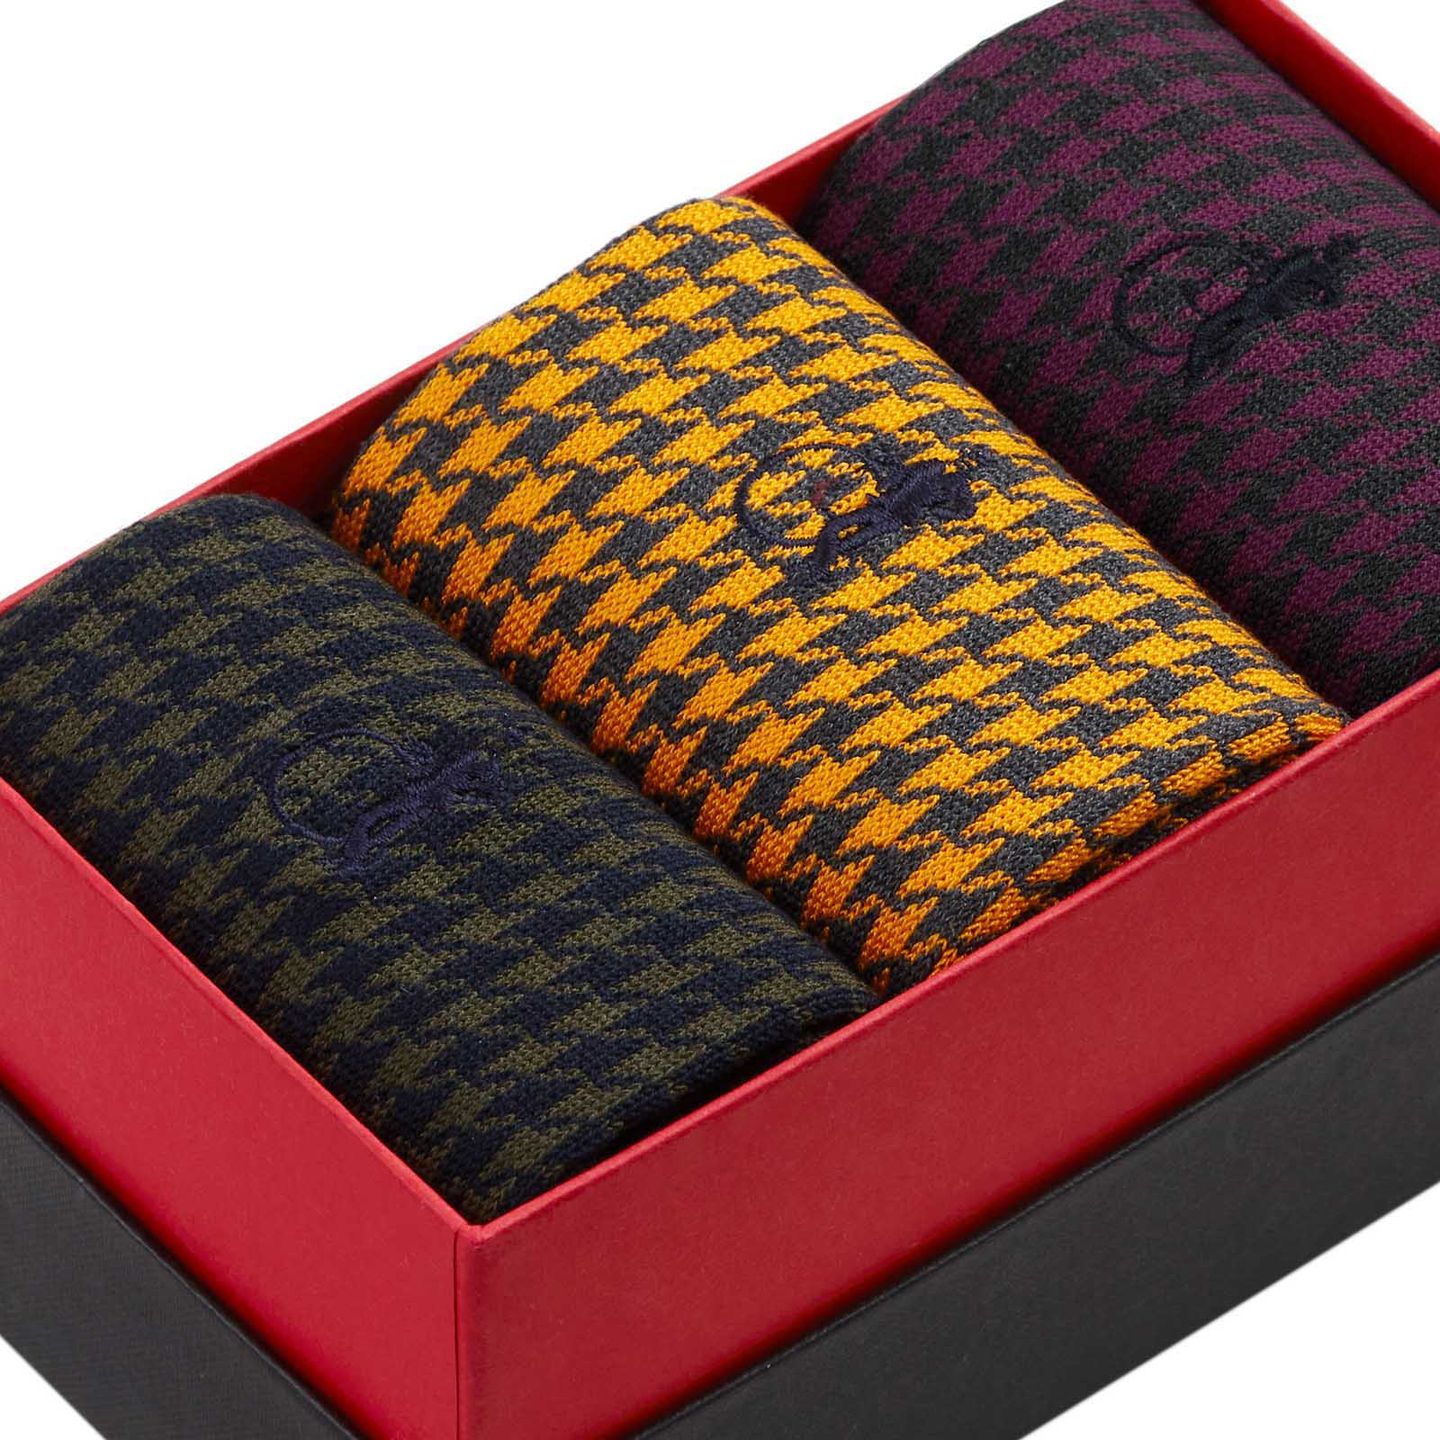 3 pair of Houndtooth patterned socks in a box